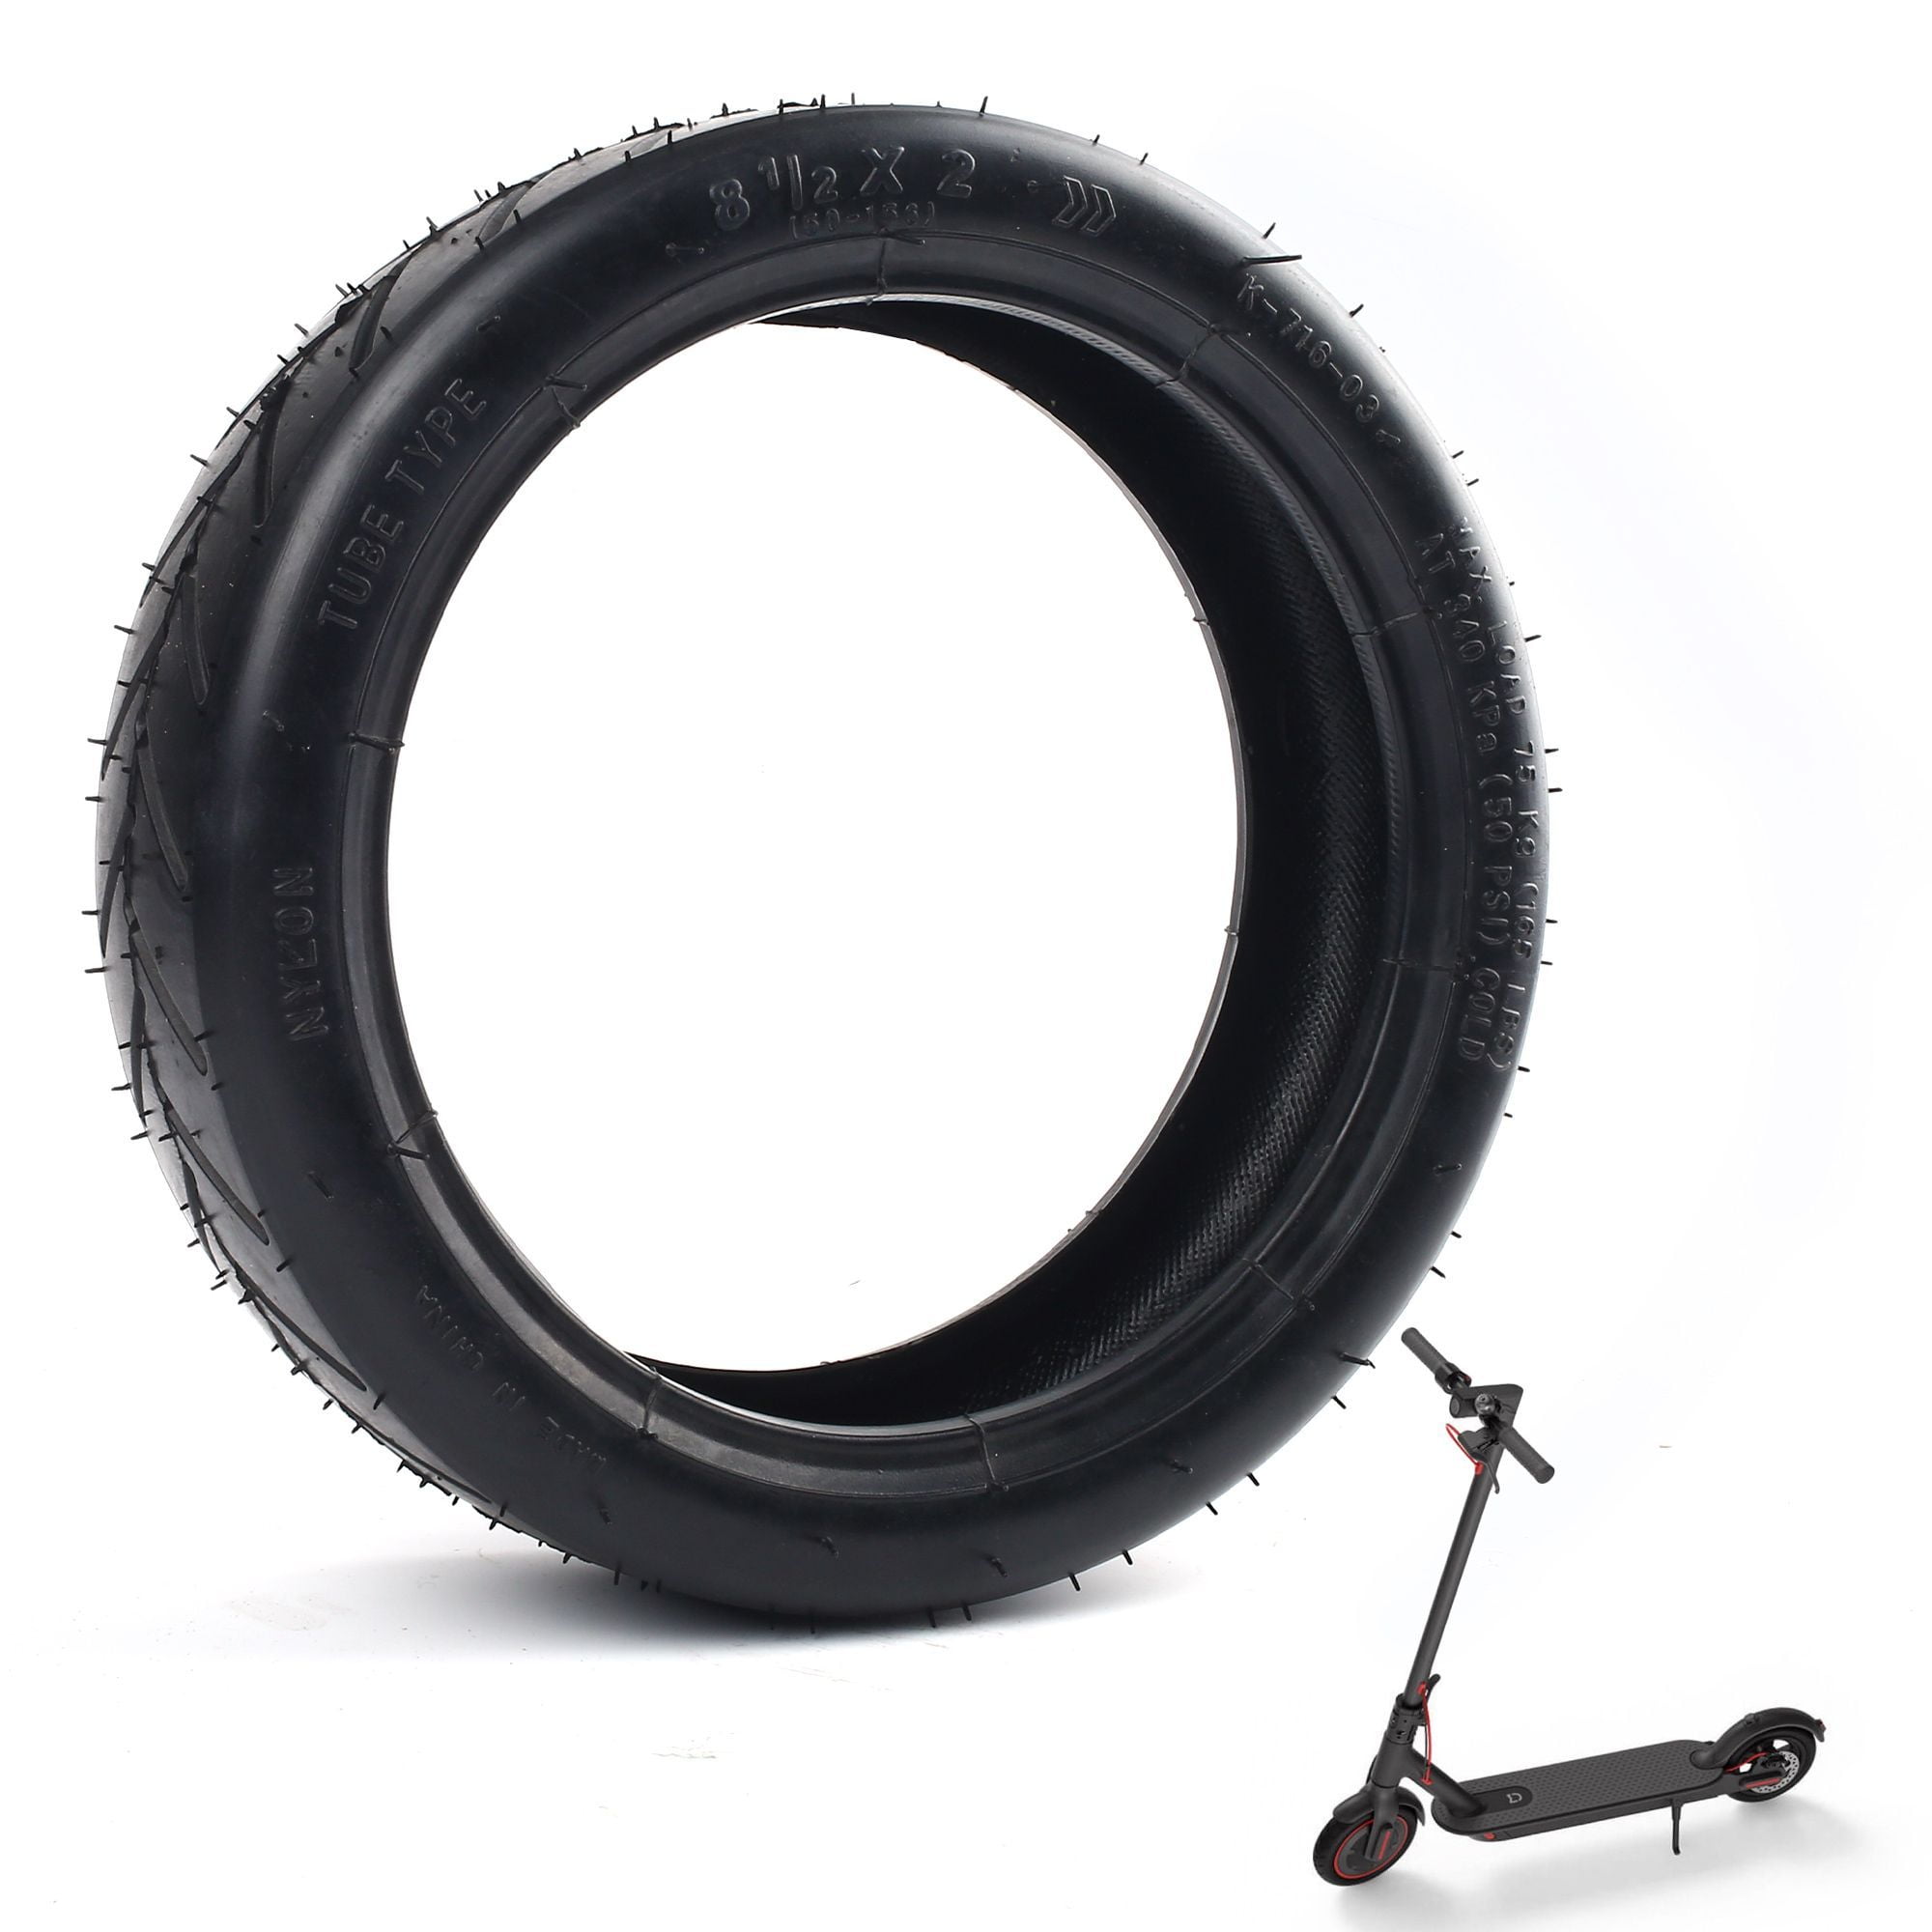 8.5x3.0 Tire 8 1/2x2 Upgrade Widened Inner Outer Tyre for Xiaomi